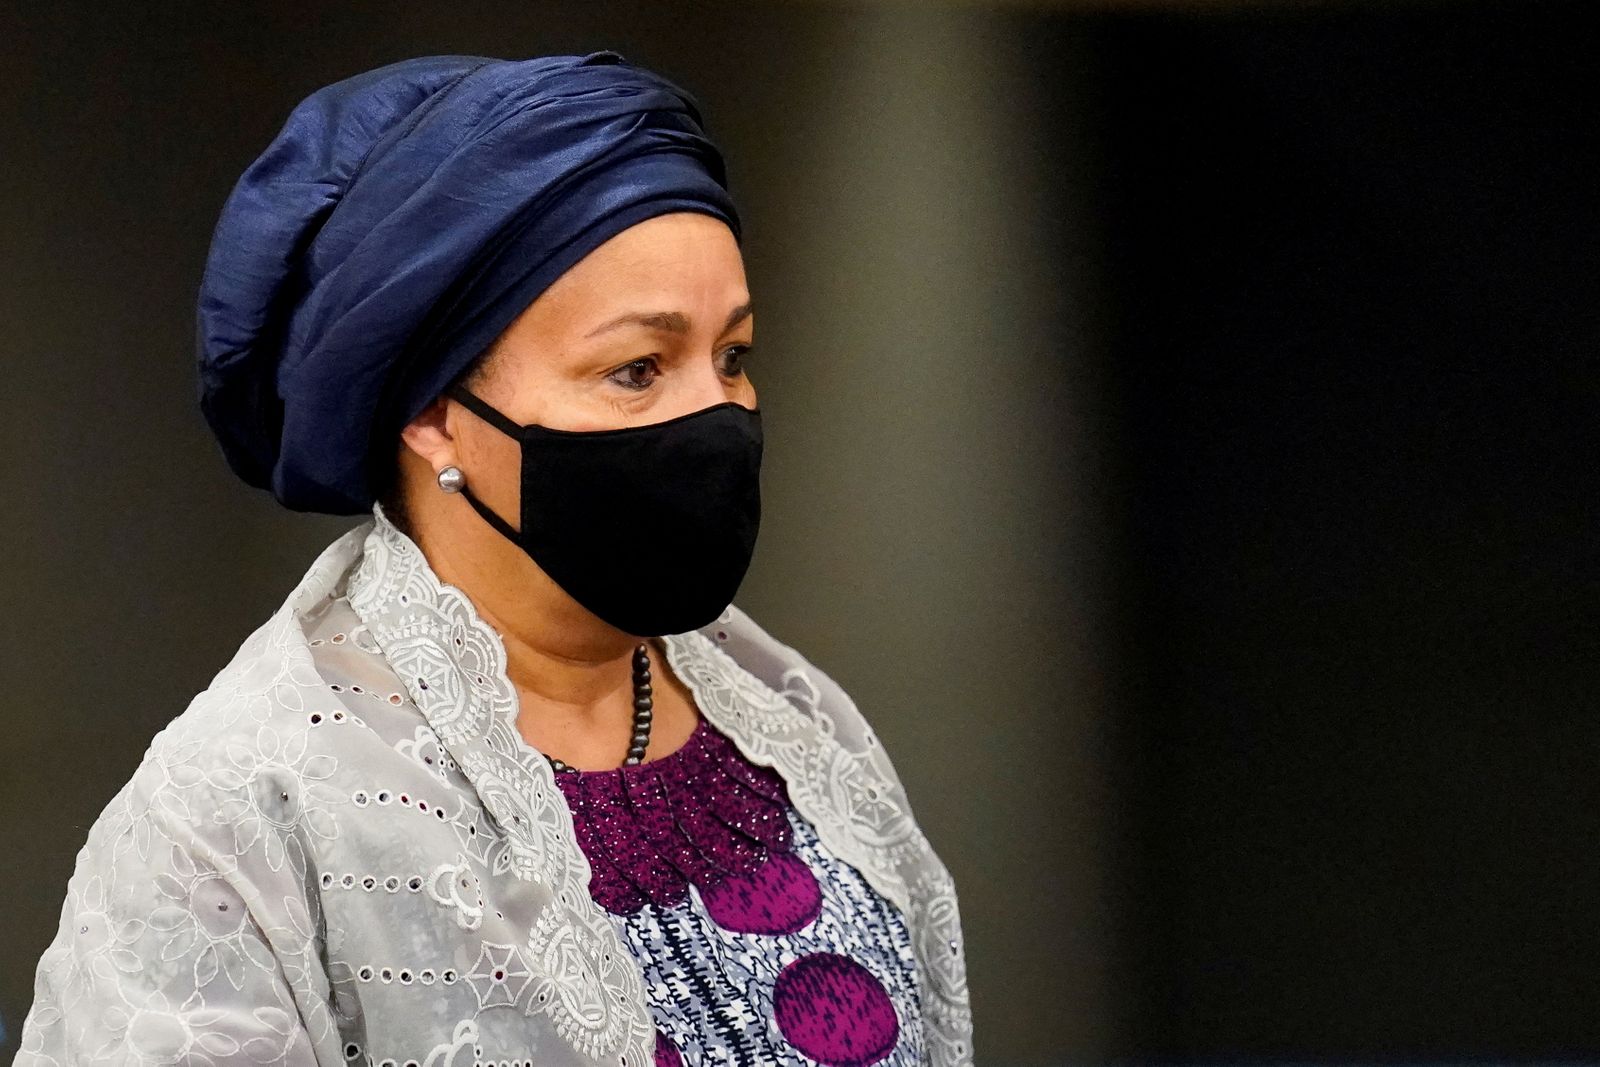 FILE PHOTO: Amina J. Mohammed, Deputy Secretary-General of the United Nations, arrives at United Nations headquarters during the 76th Session of the U.N. General Assembly, in New York, U.S., September 20, 2021. John Minchillo/Pool via REUTERS/File Photo